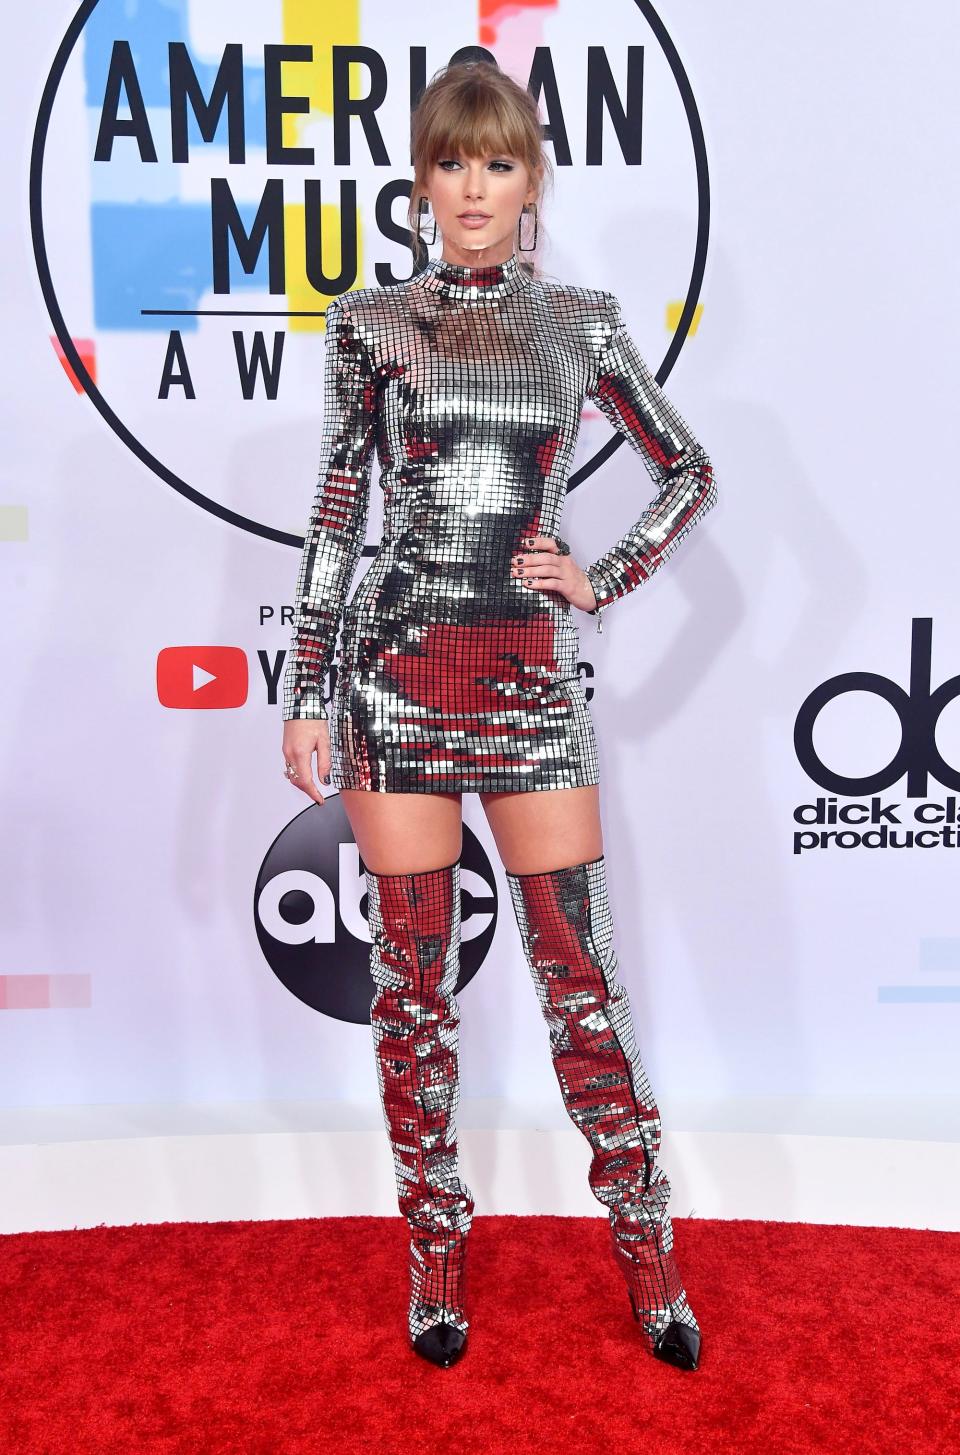 Taylor Swift wears a silver dress and boots at the 2018 American Music Awards.